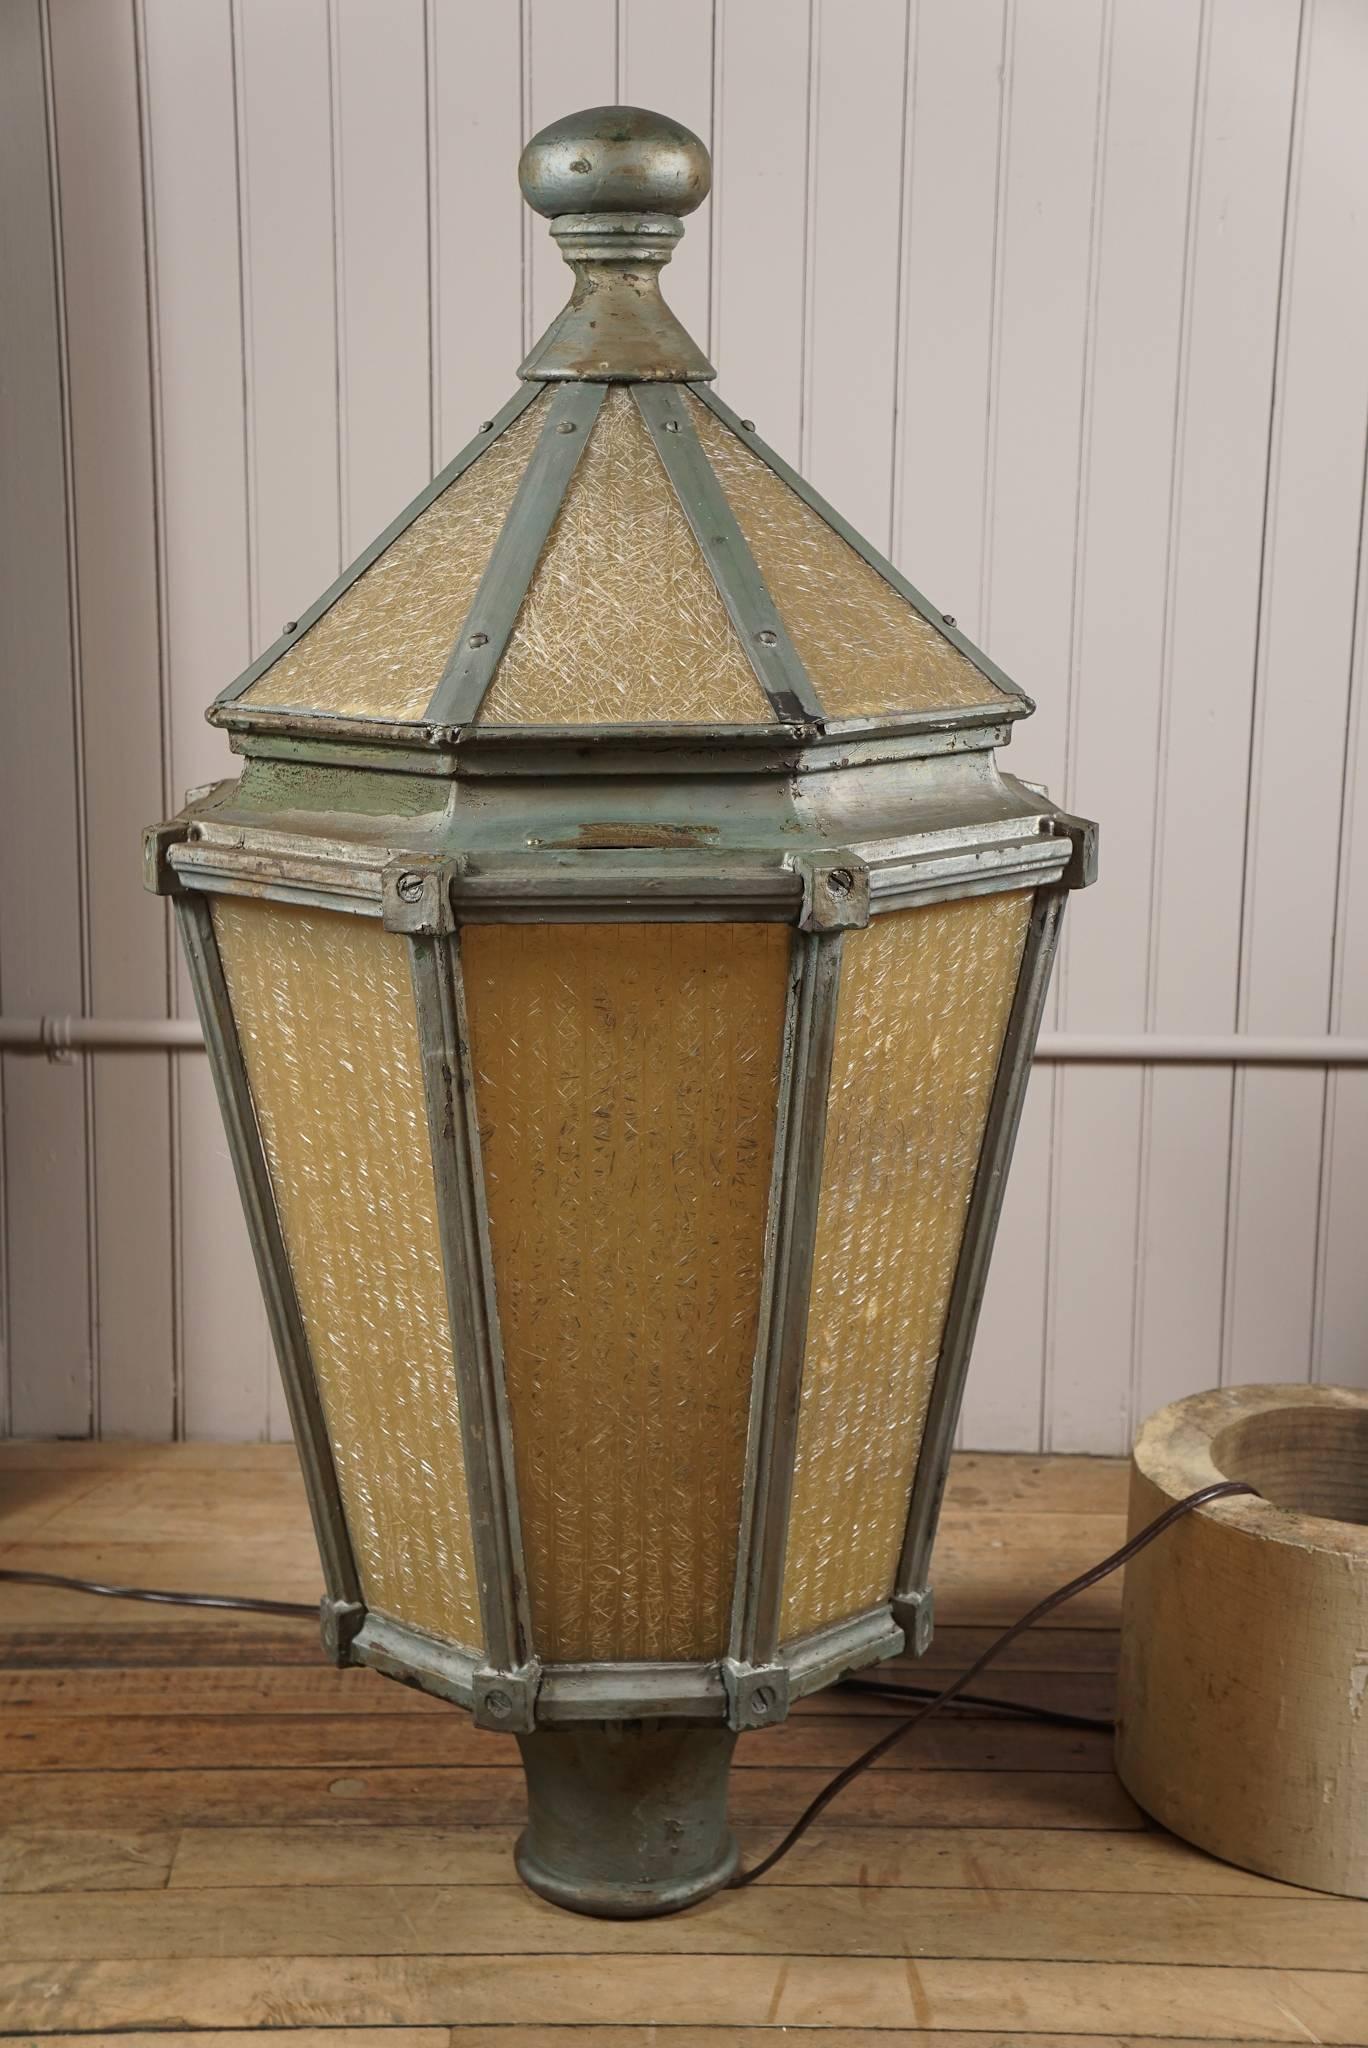 Pair of hexagonal post lamps - cast iron framework in old silver paint patina - fitted with patterned fiberglass panels emitting a golden glow - brass tag 